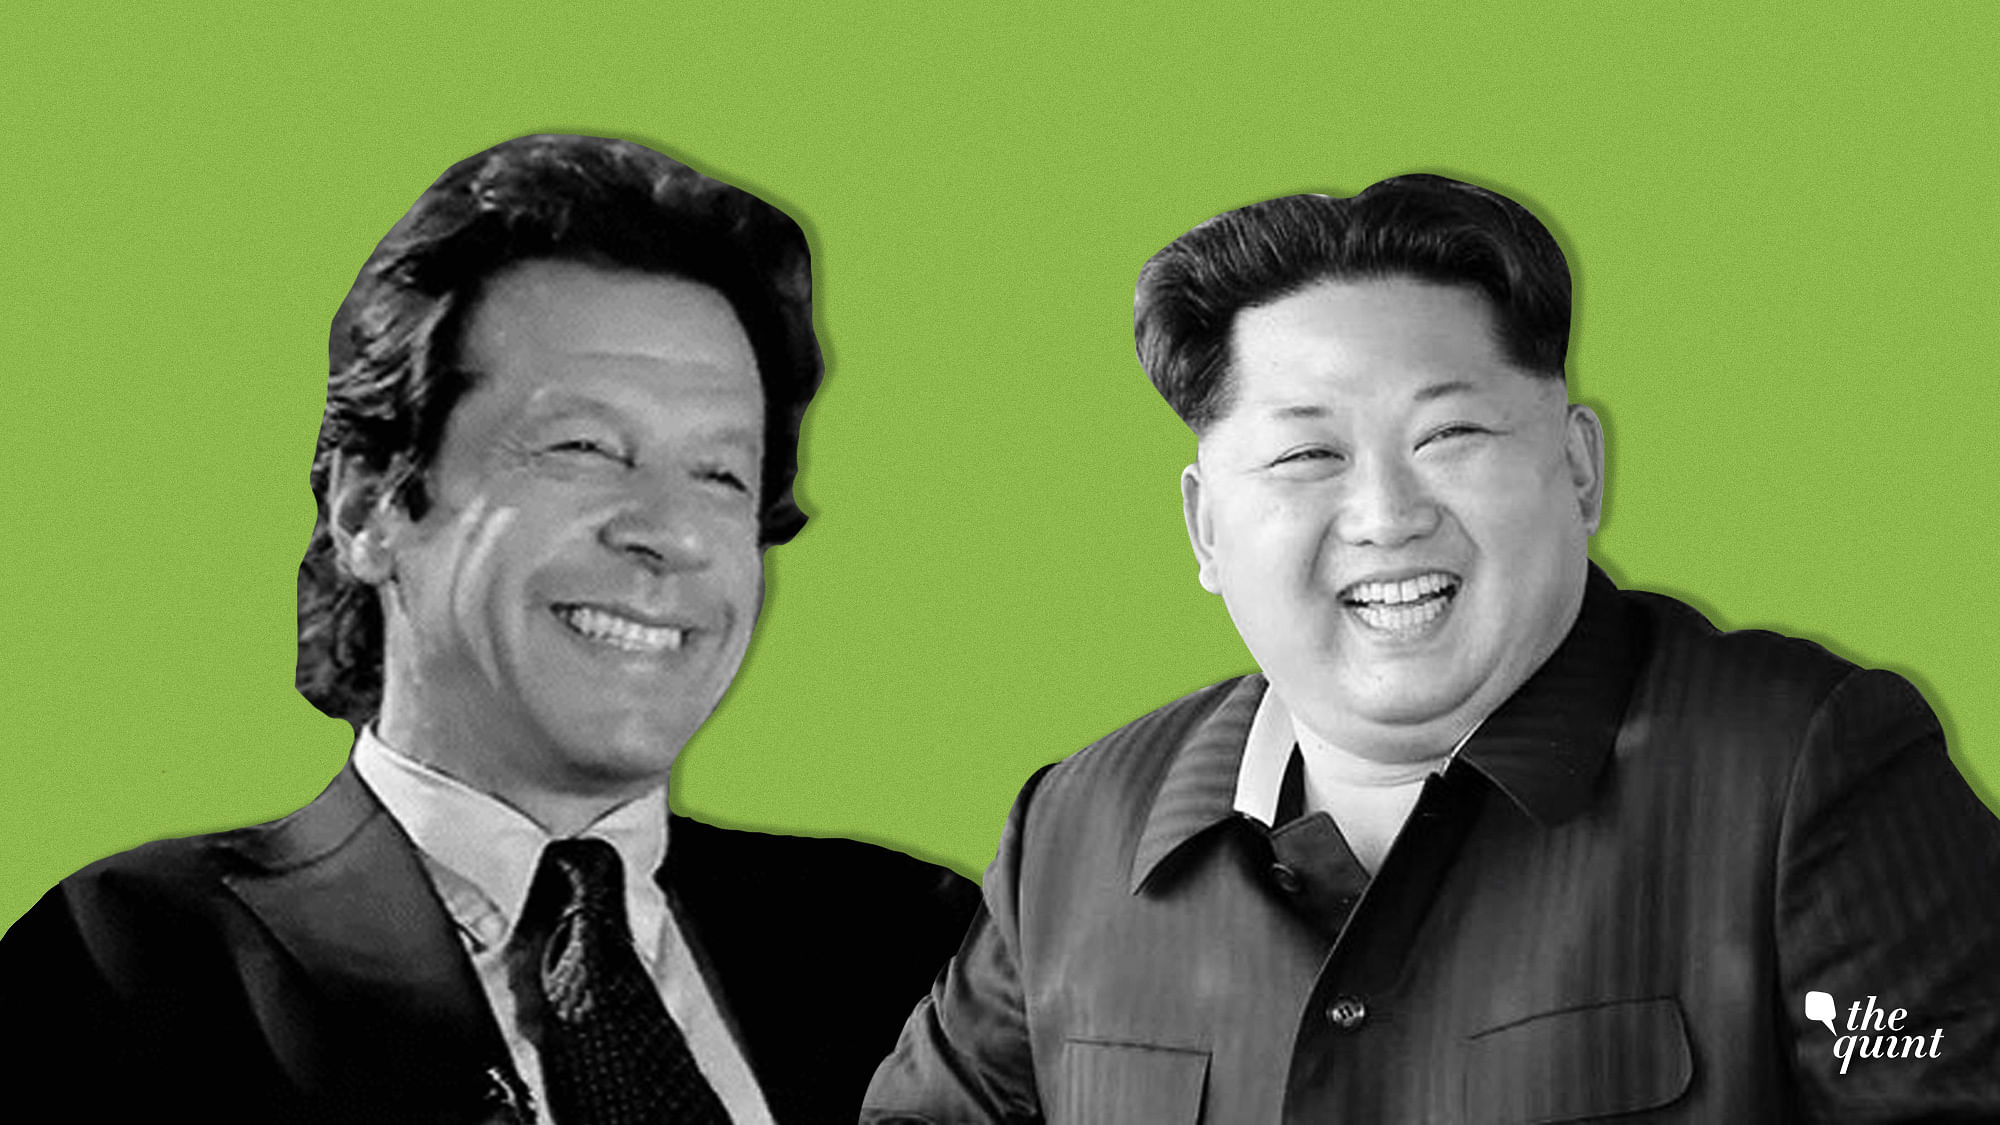 Kim is craving for what Pakistan enjoys at the moment: great relations with the US, no isolation for the nukes, and an unlimited supply of goodwill for its meaningless gestures.